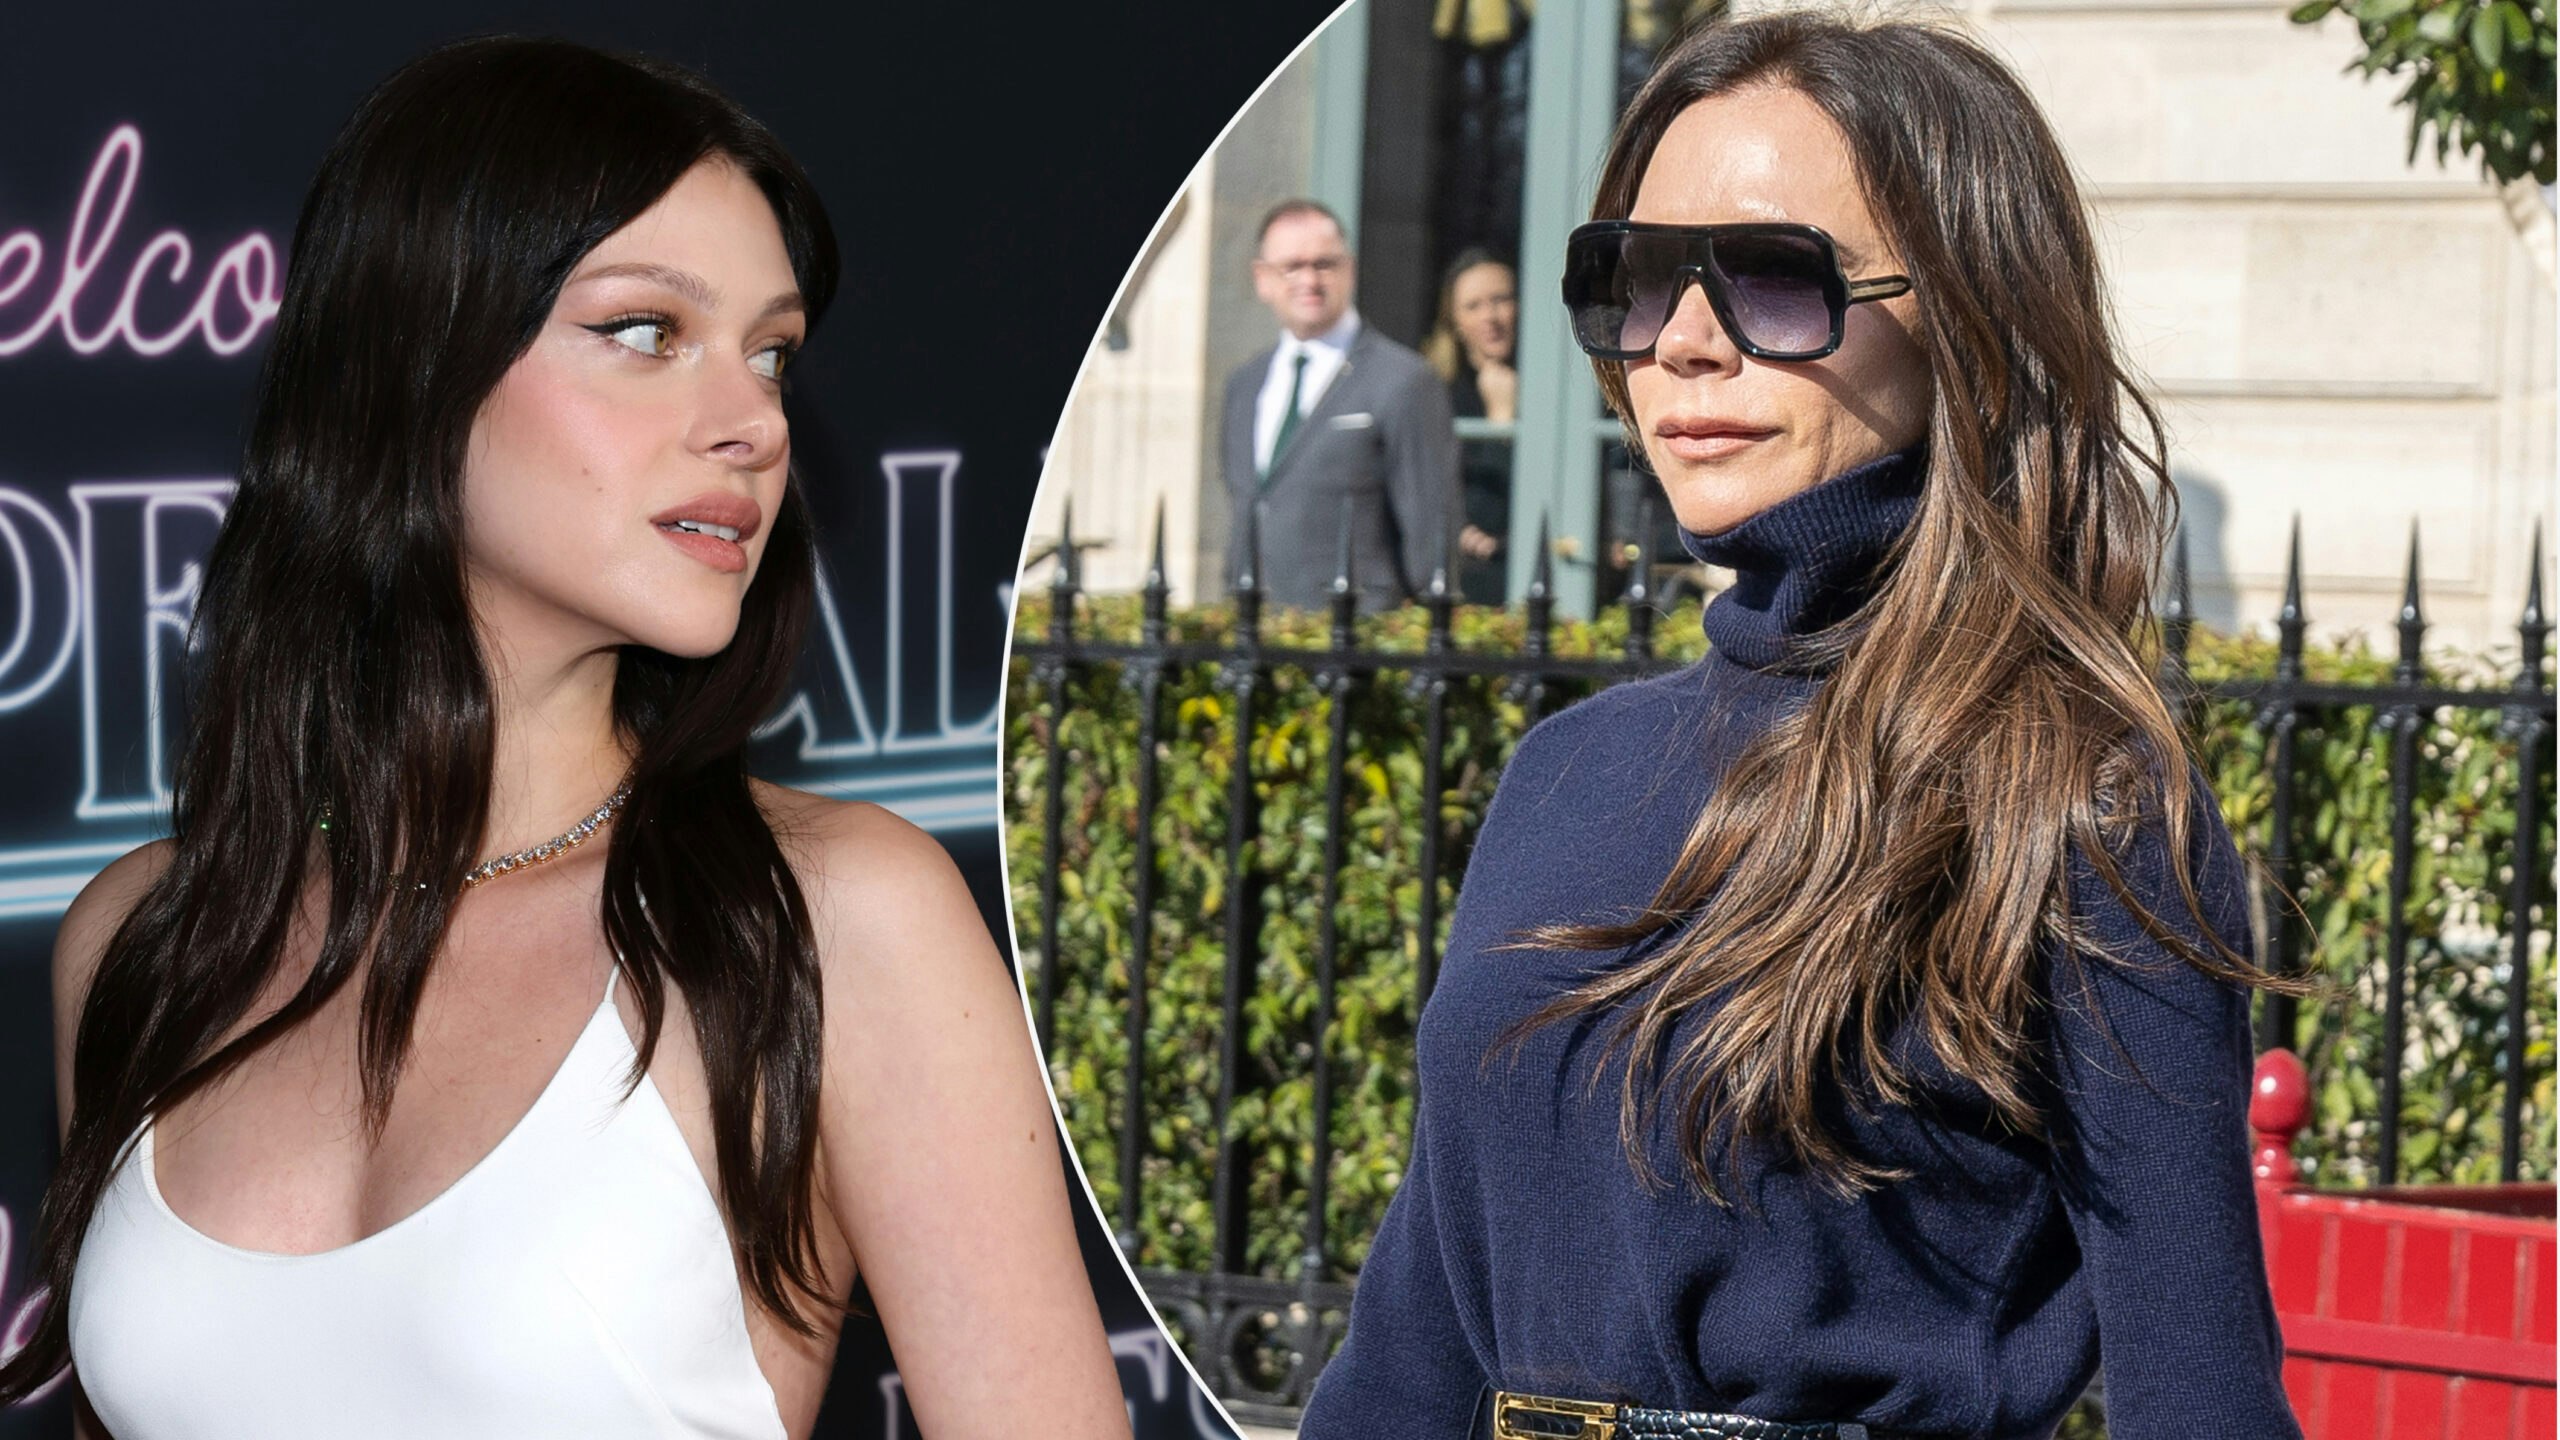 Nicola Peltz Pays Tribute to Her Mother-in-Law Victoria Beckham